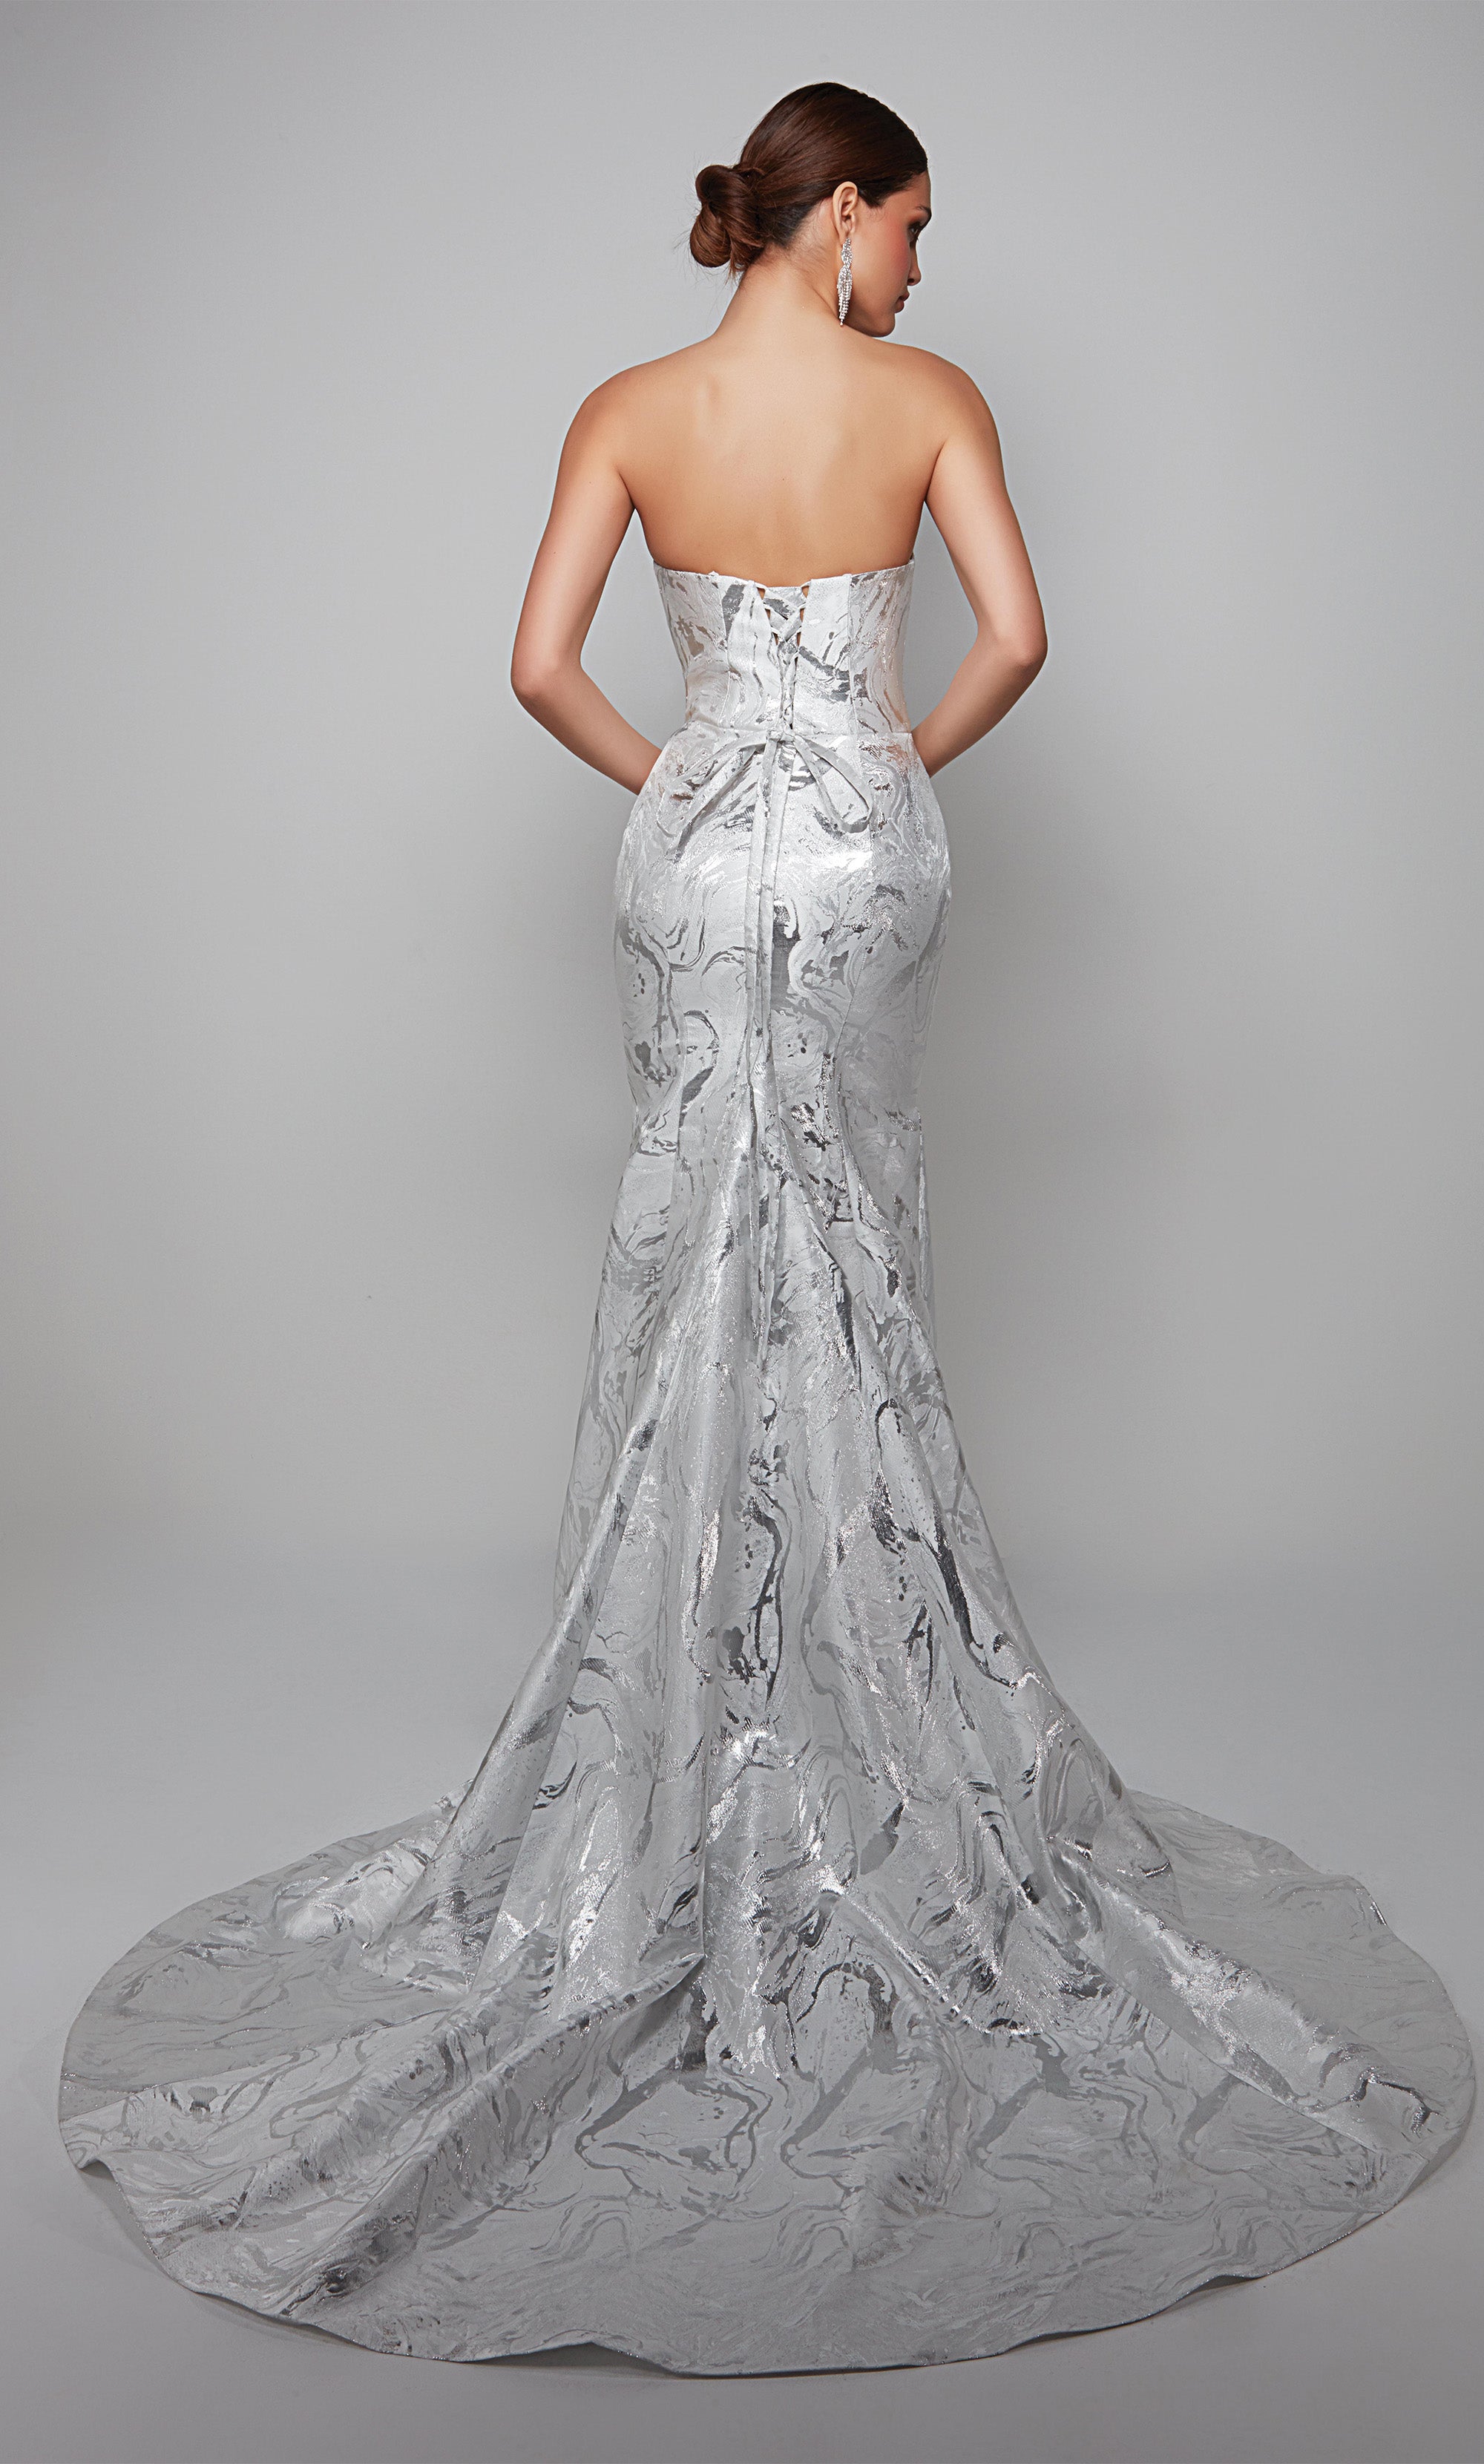 Formal Dress: 7055. Long, Strapless, Mermaid, Lace-up Back | Alyce